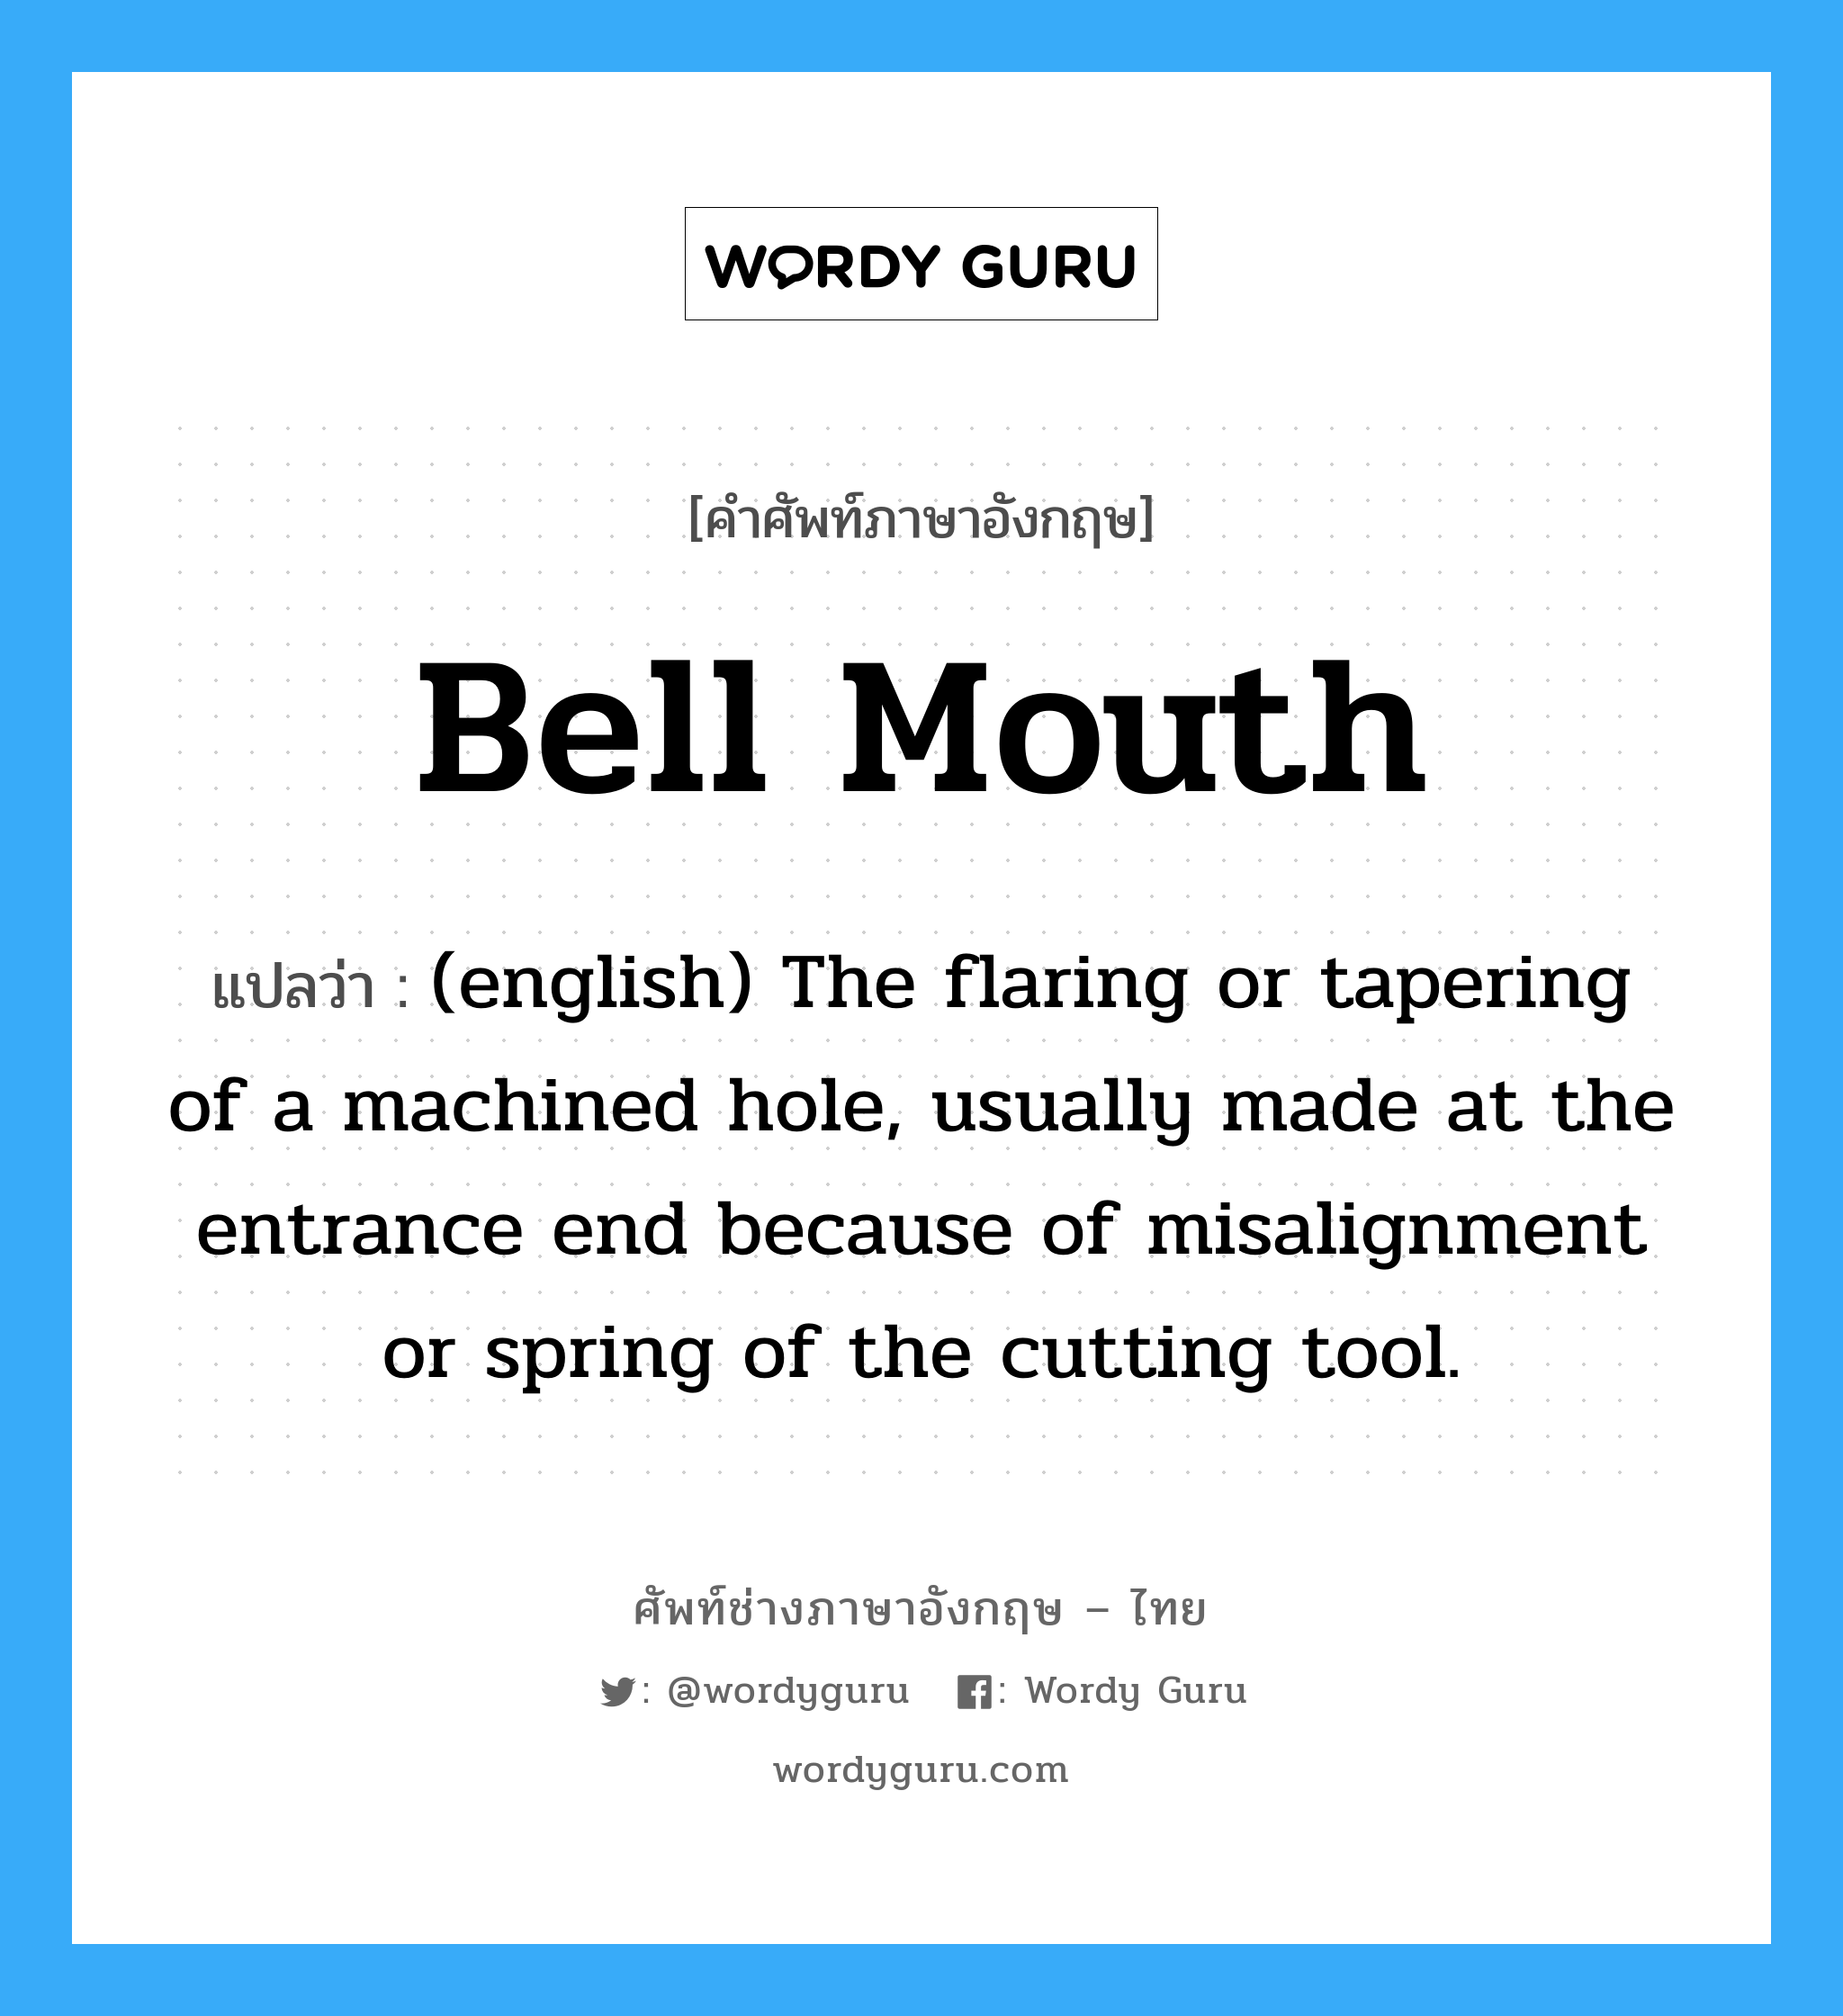 Bell Mouth แปลว่า?, คำศัพท์ช่างภาษาอังกฤษ - ไทย Bell Mouth คำศัพท์ภาษาอังกฤษ Bell Mouth แปลว่า (english) The flaring or tapering of a machined hole, usually made at the entrance end because of misalignment or spring of the cutting tool.